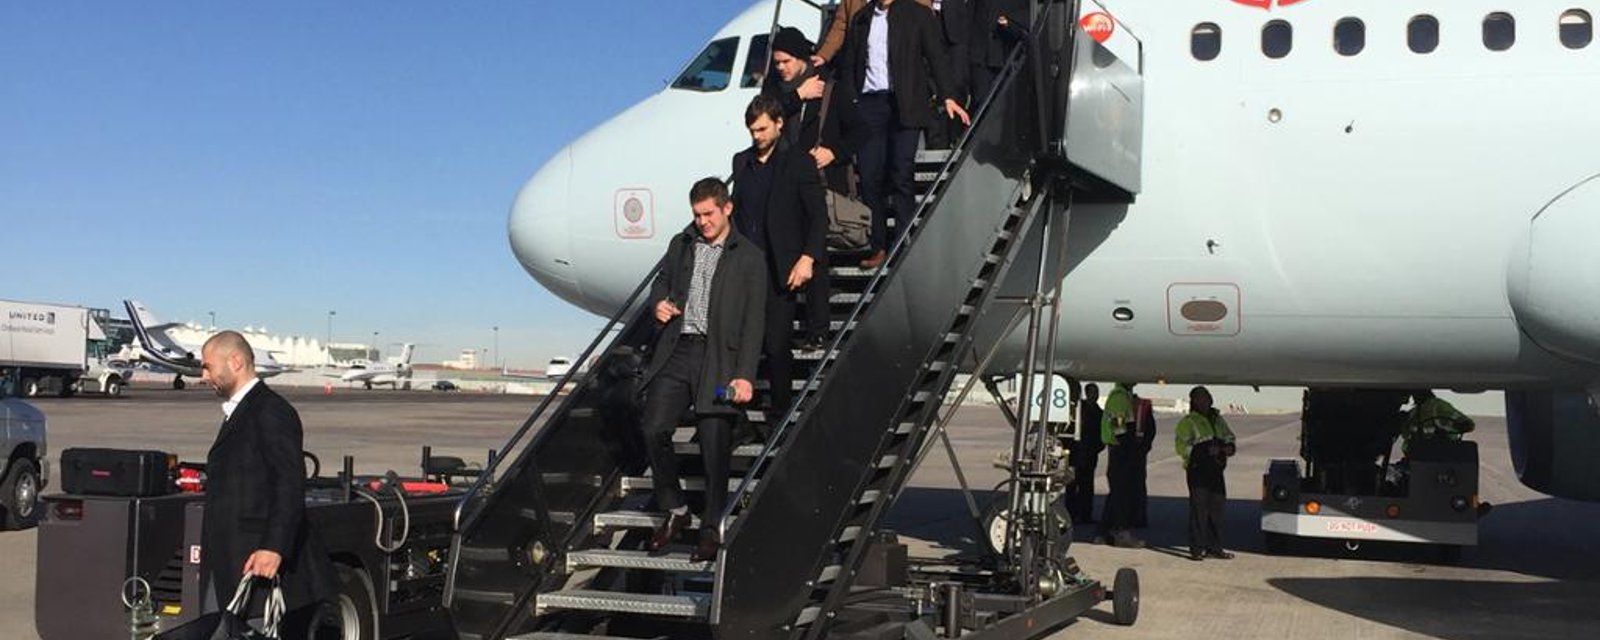 Emergency landing for Flames’ plane after last night’s loss